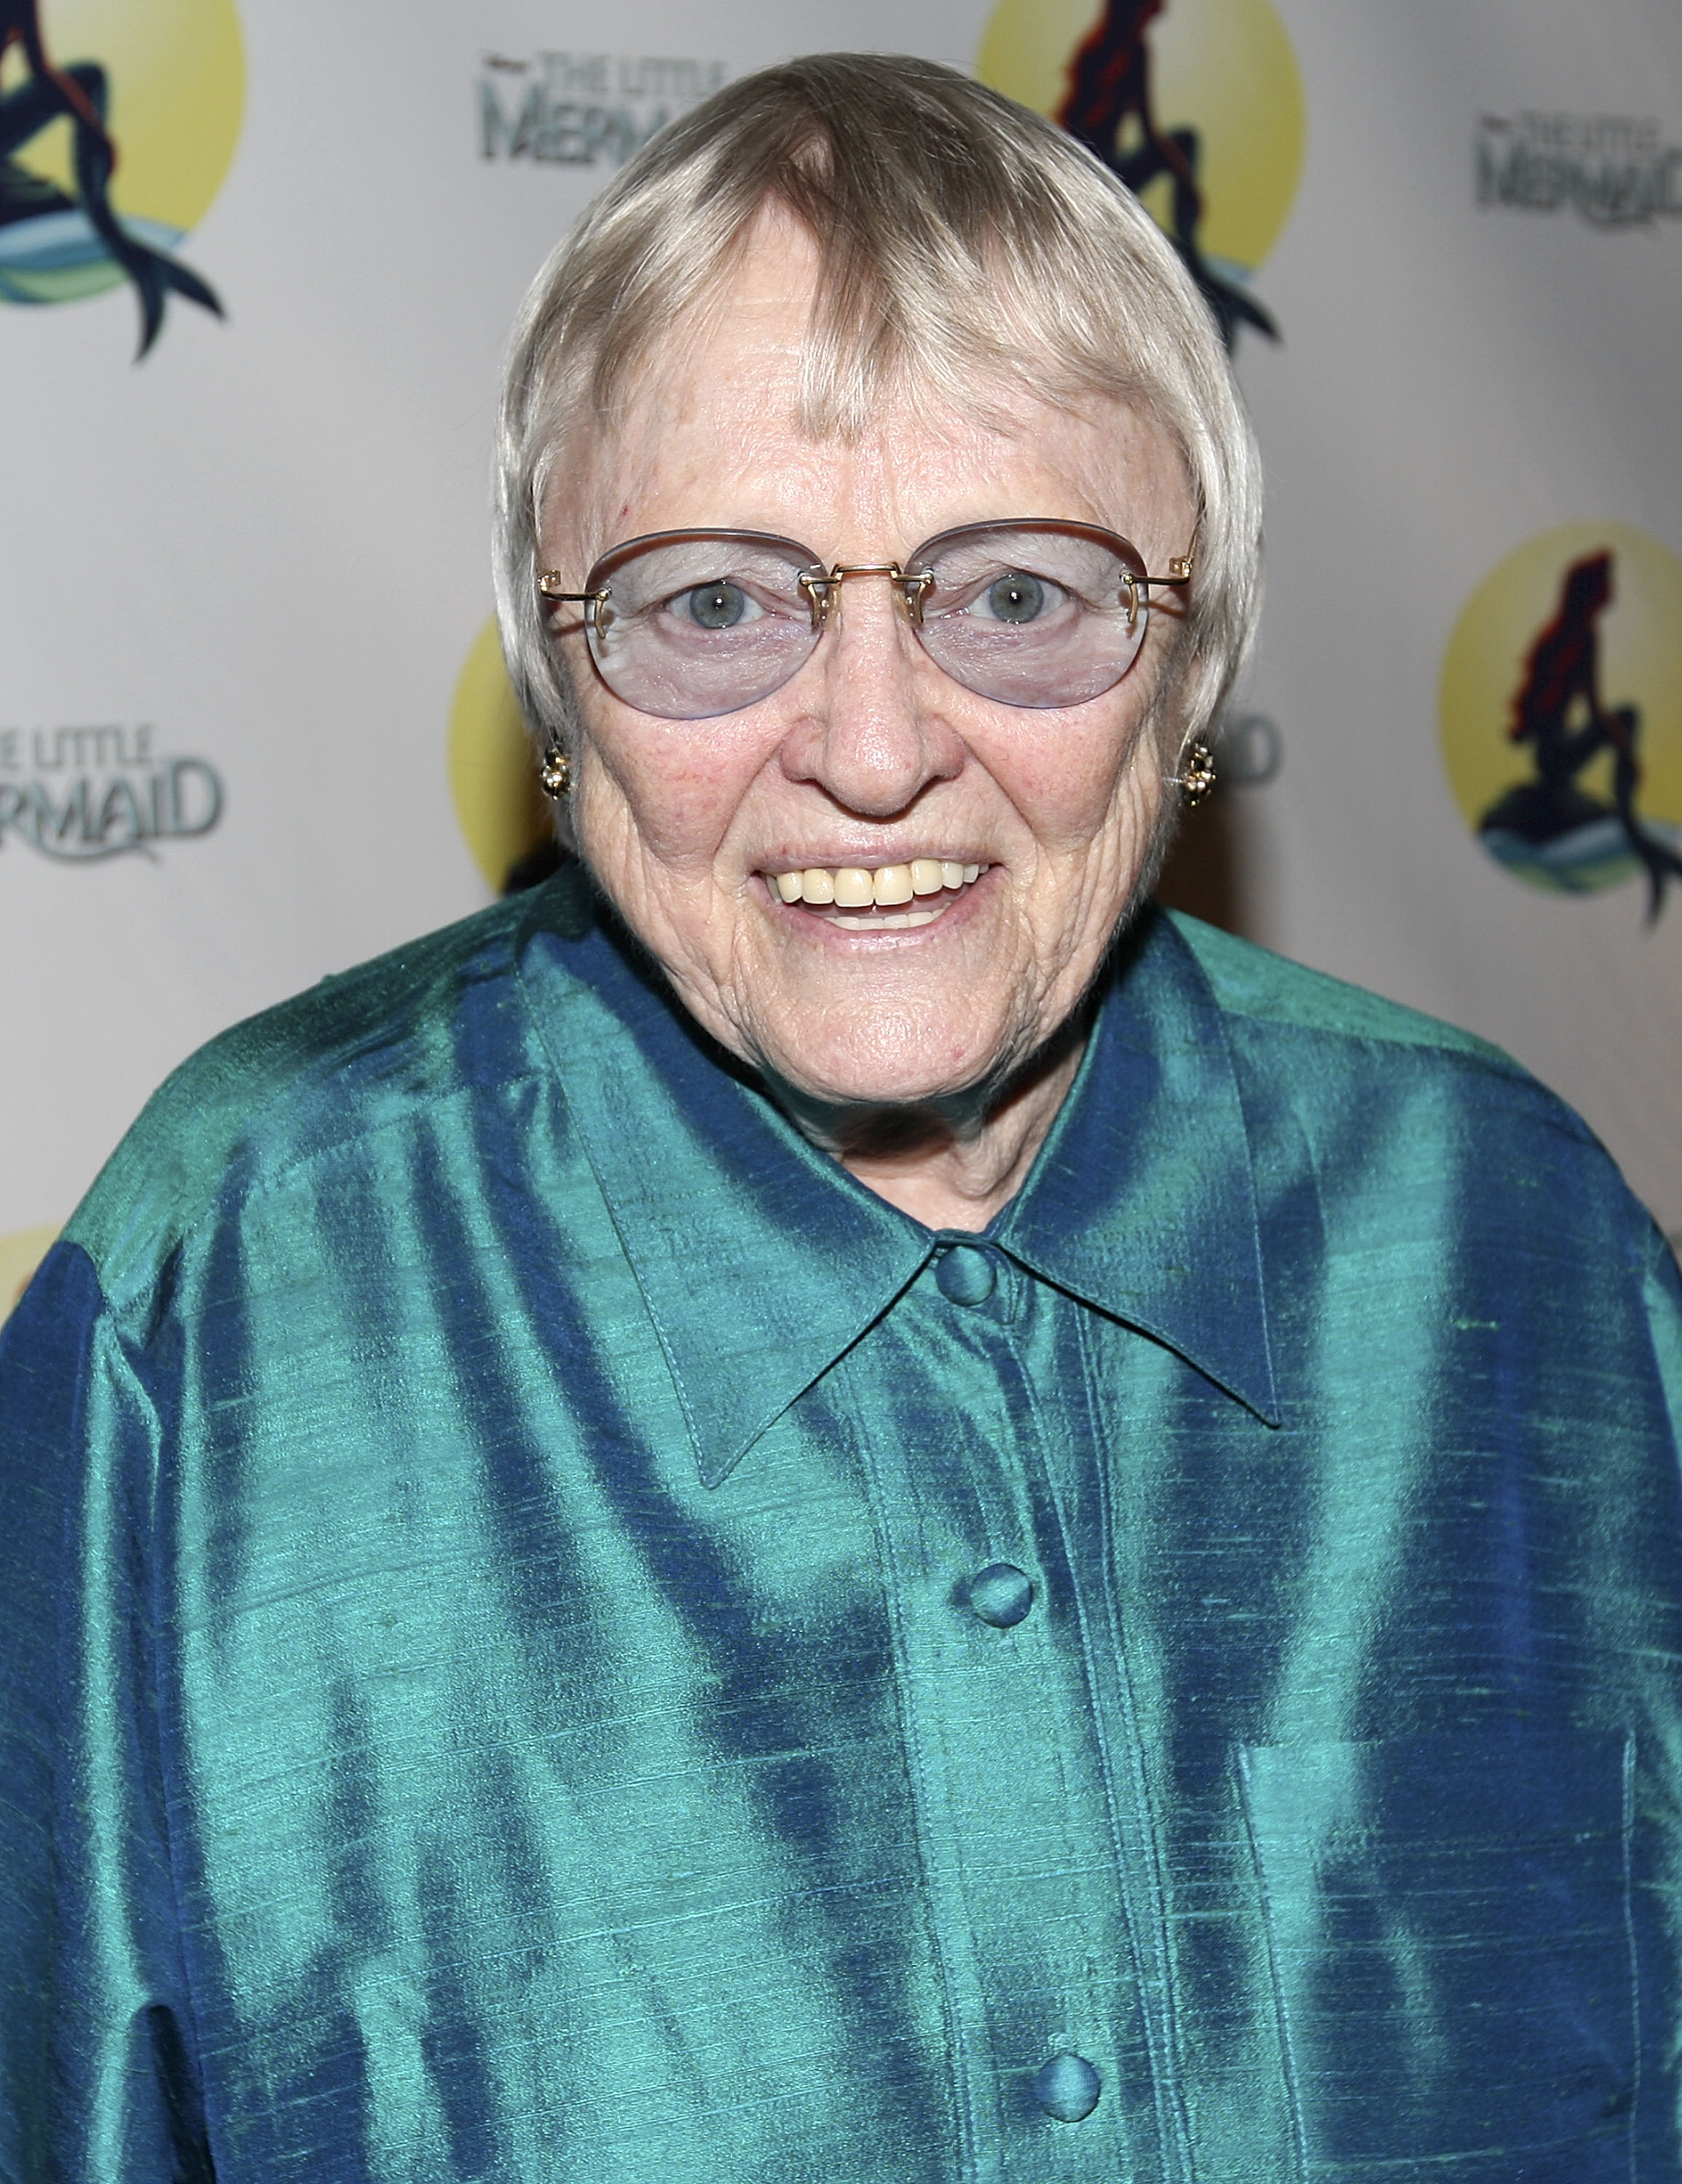 Pat Carroll attends the after party to celebrate the opening night of Broadway's "The Little Mermaid" at Roseland Ballroom on January 10, 2008 in New York City. 